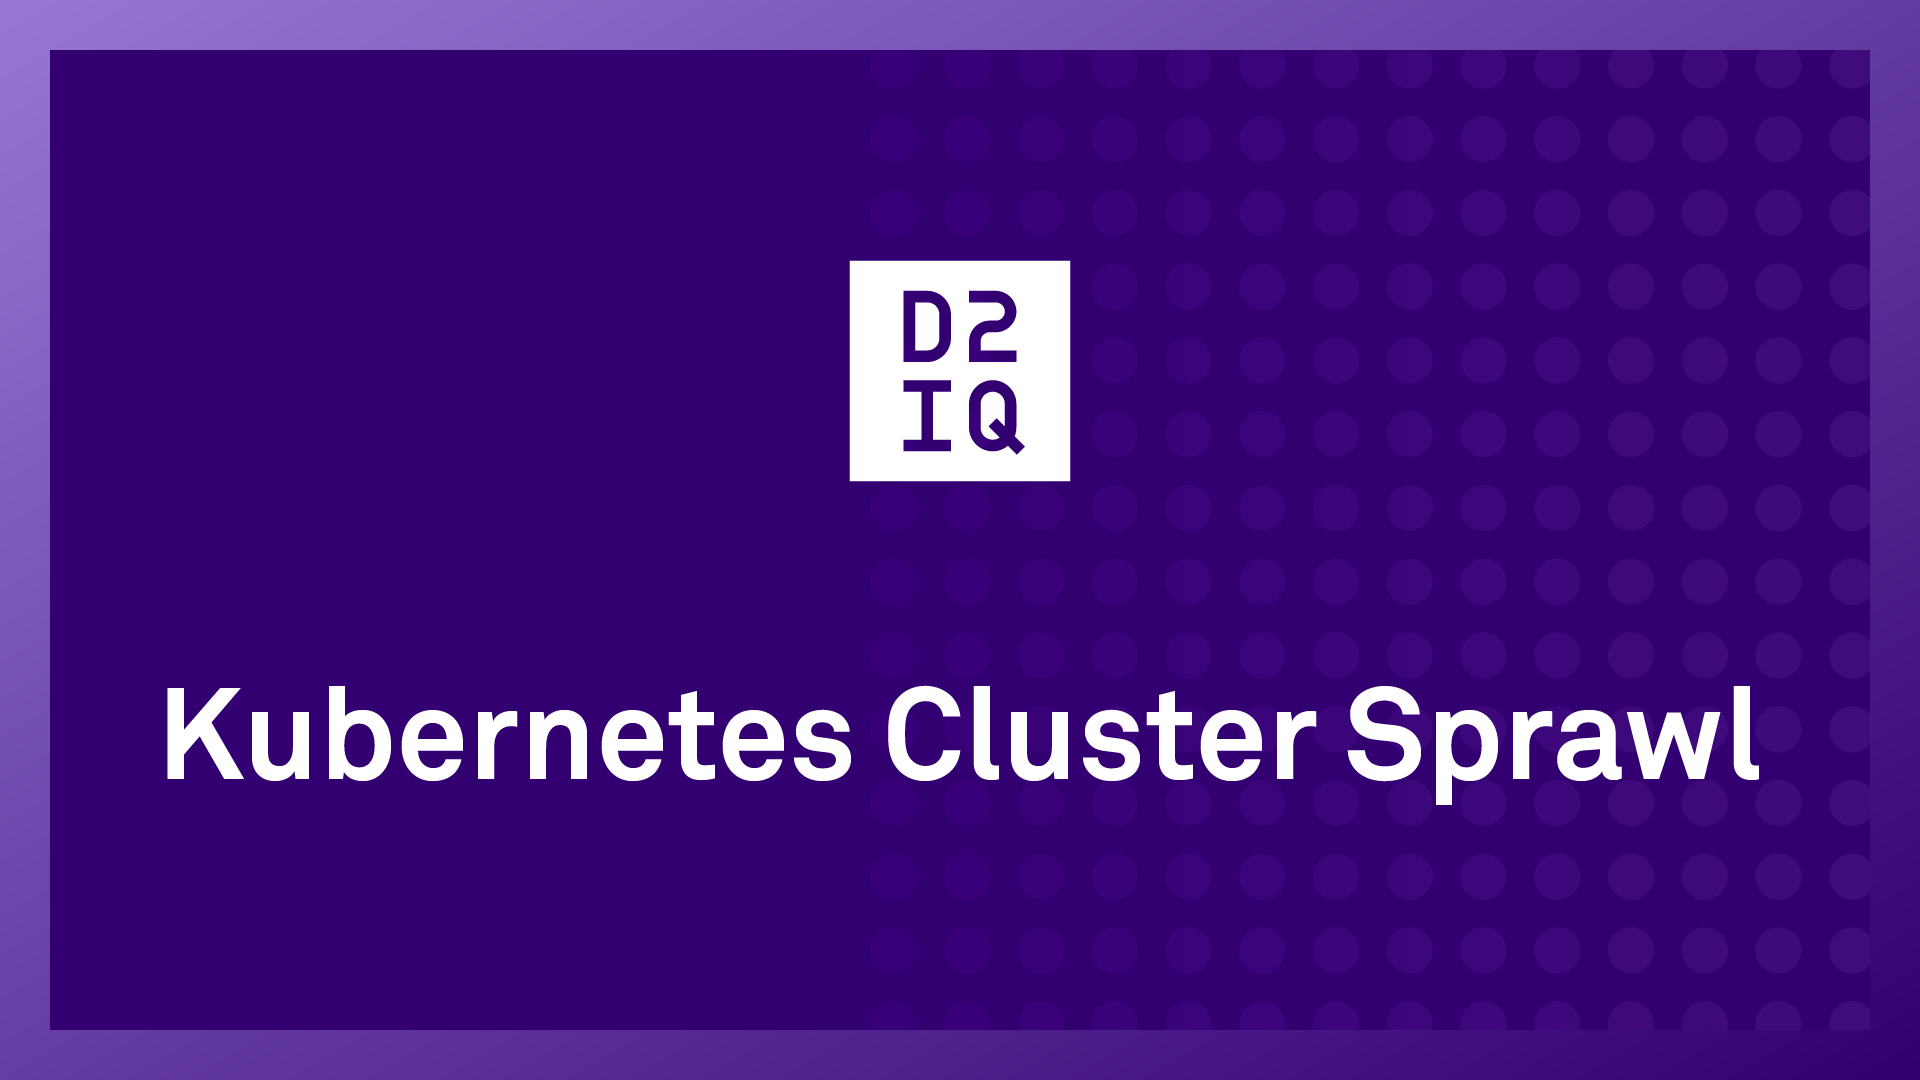 Kubernetes Cluster Sprawl: How to Effectively Manage It Across Distributed, Heterogeneous Environments